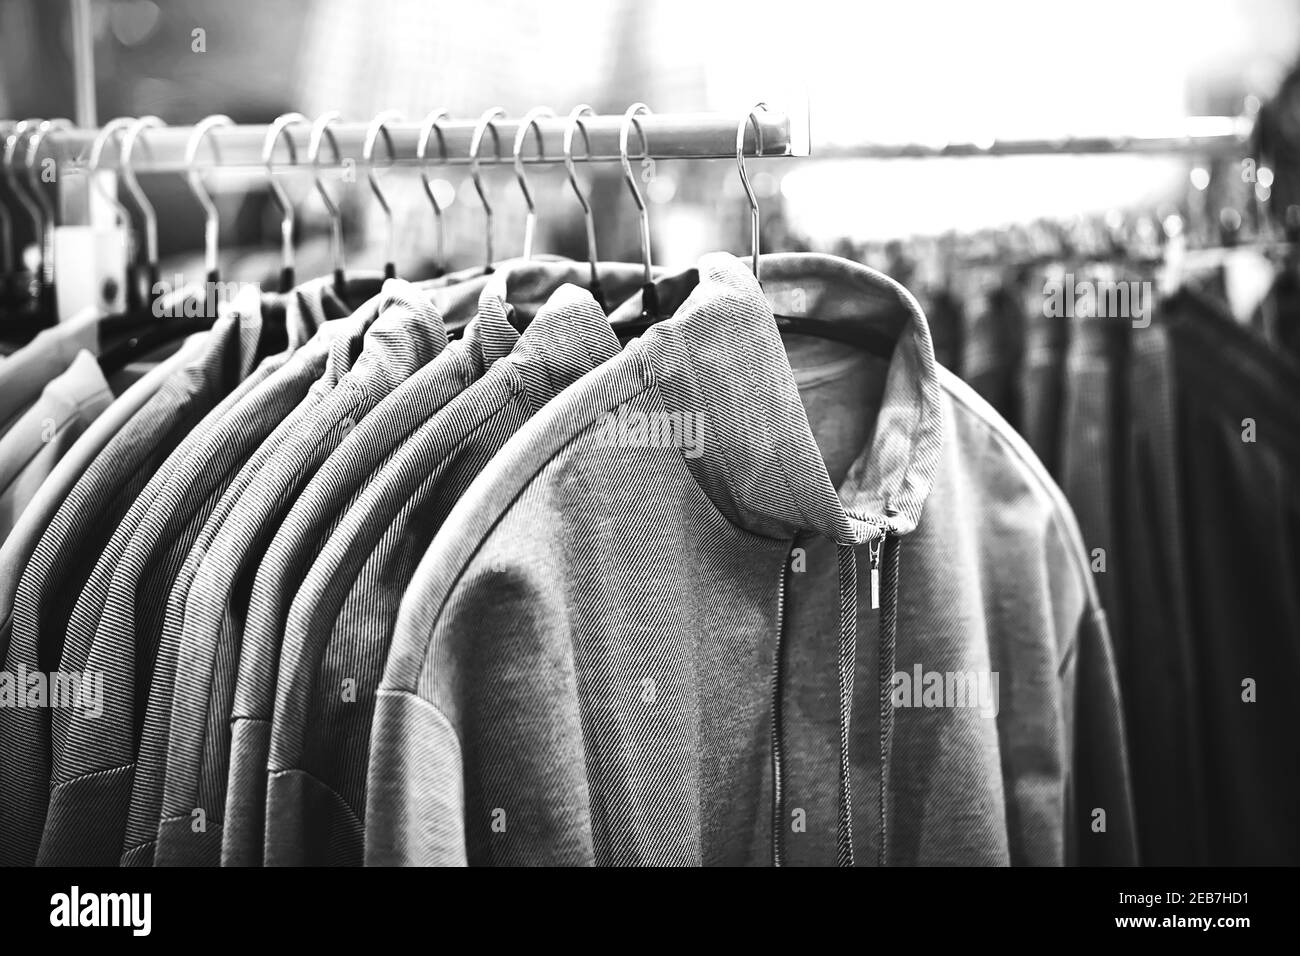 A black-and-white image of hoodies hanging on hangers in a clothing store in the mall. Shopping. Stock Photo